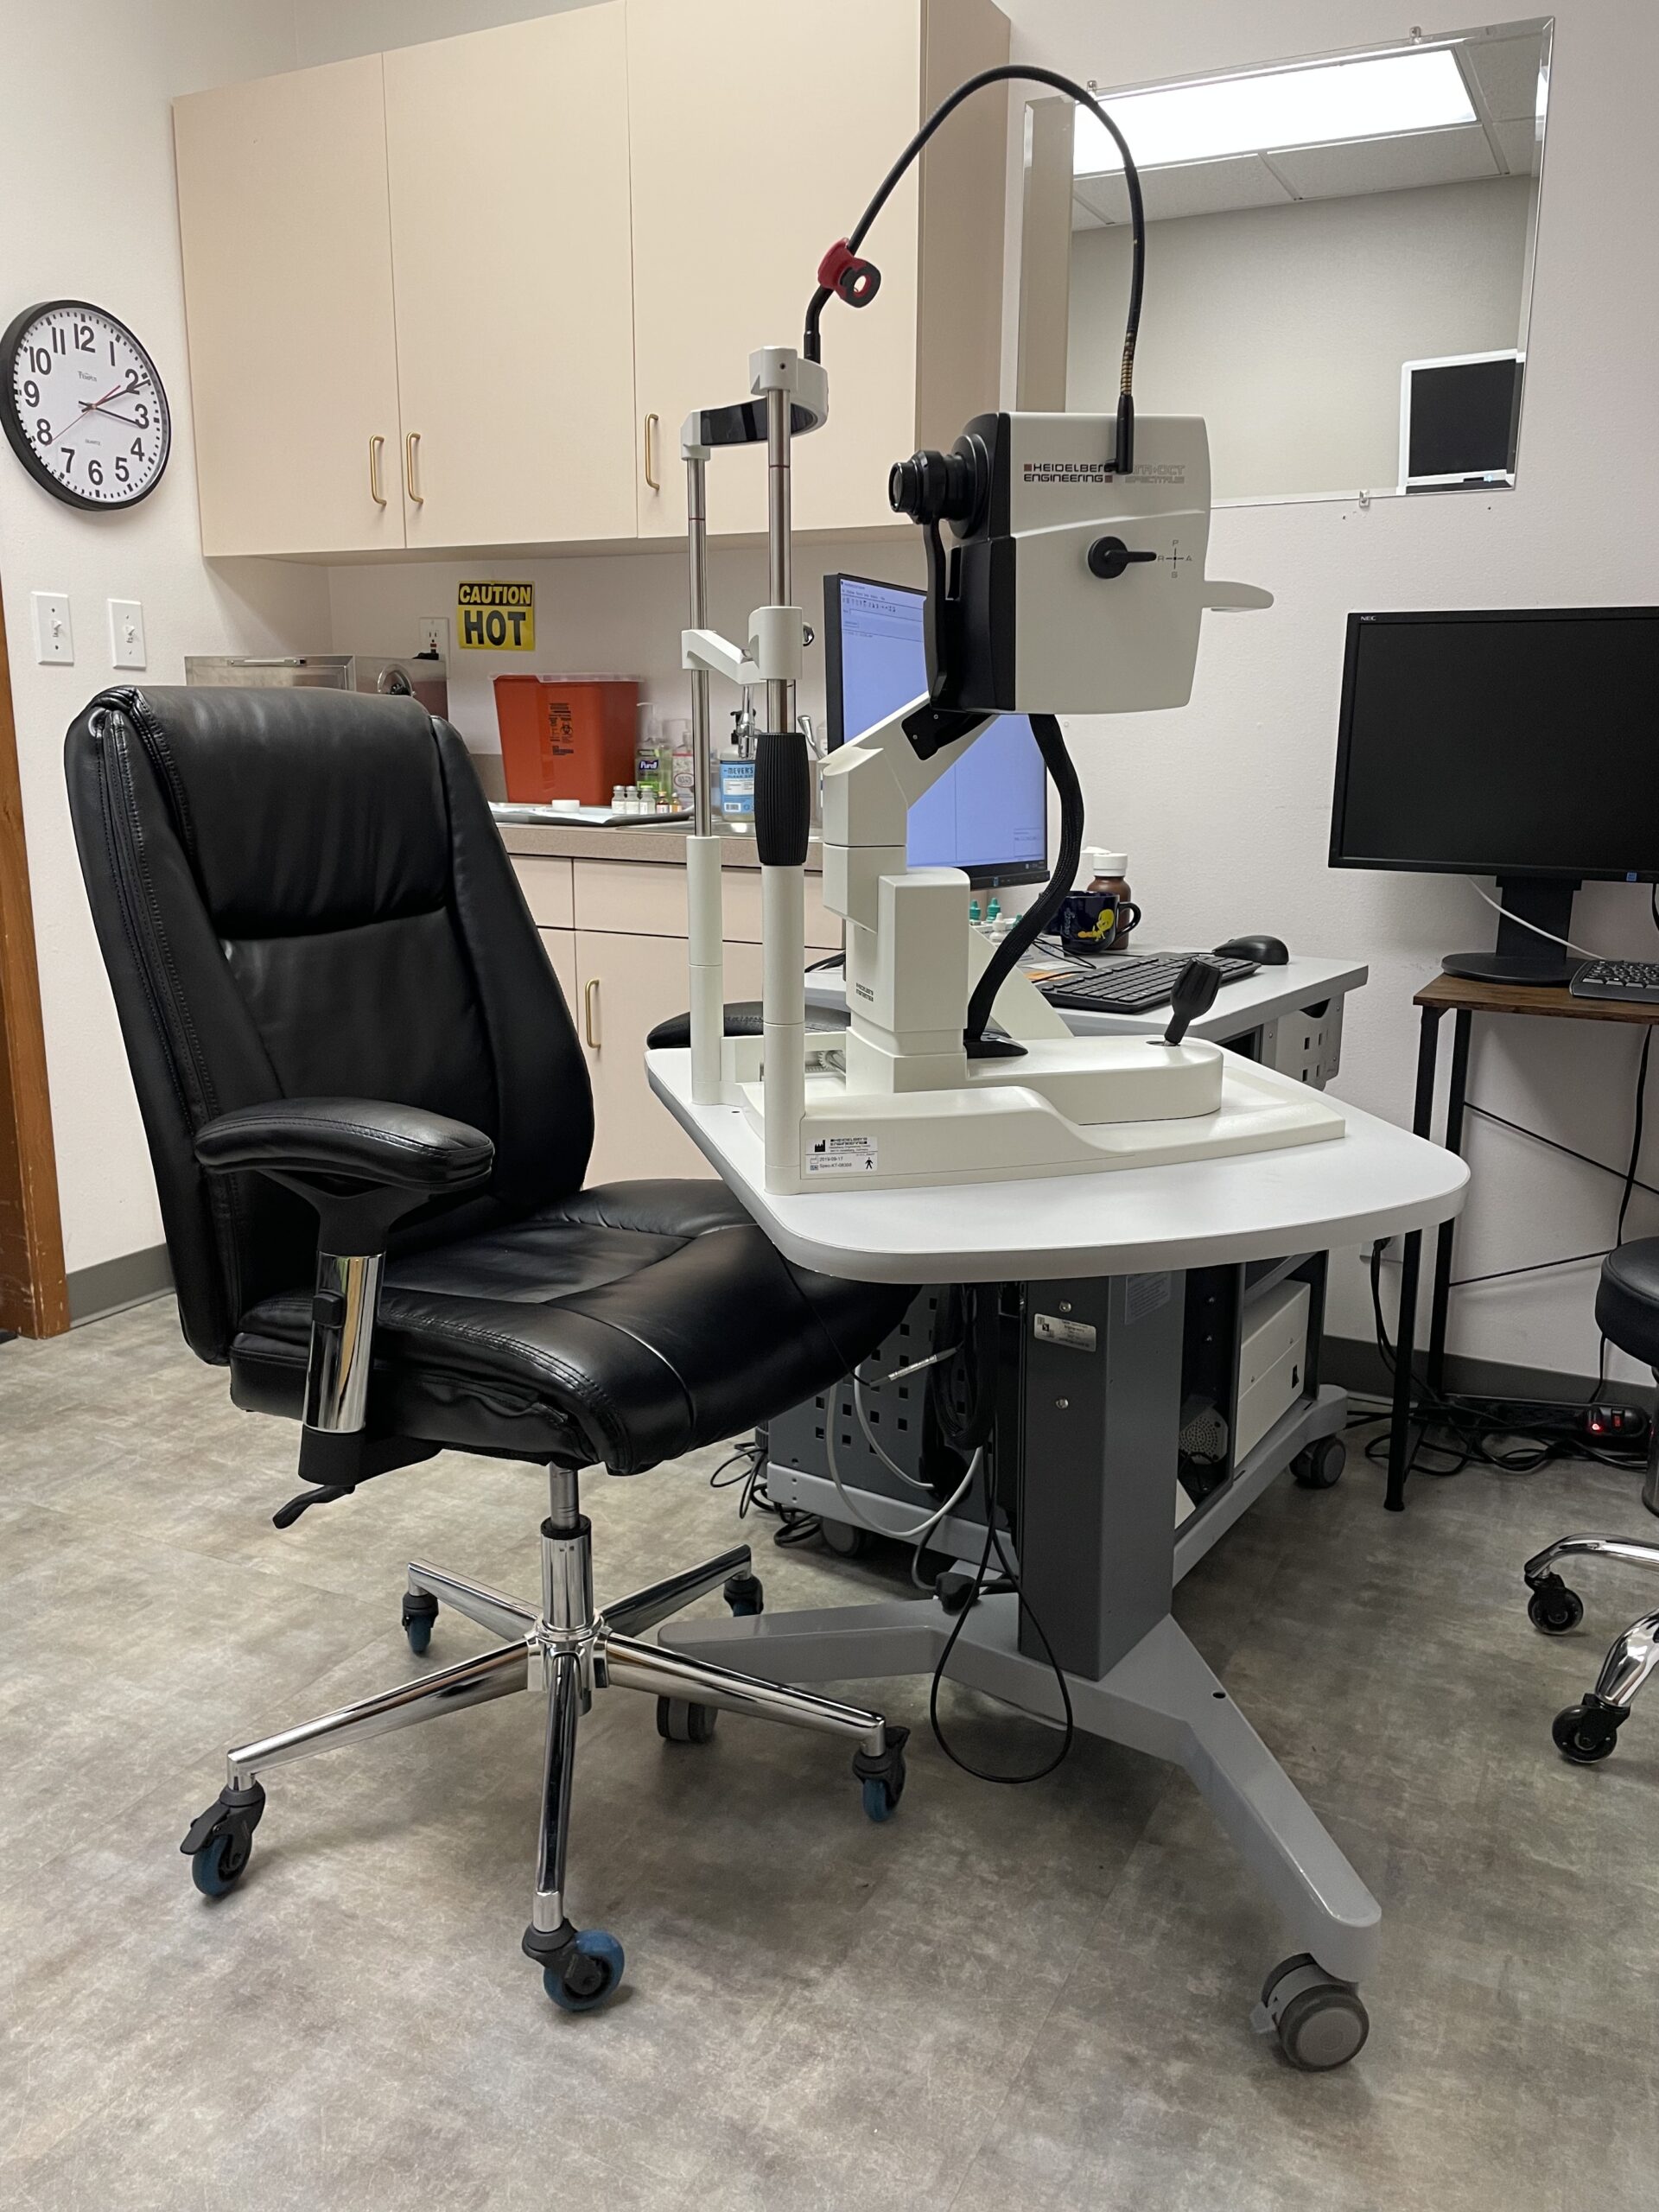 An Optos machine is used in ophthalmology for capturing ultra-widefield images of the retina, which aids in the detection and management of various eye conditions such as diabetic retinopathy, age-related macular degeneration, and retinal detachments. This non-invasive imaging technology allows for a detailed view of the retina without the need for dilation drops.